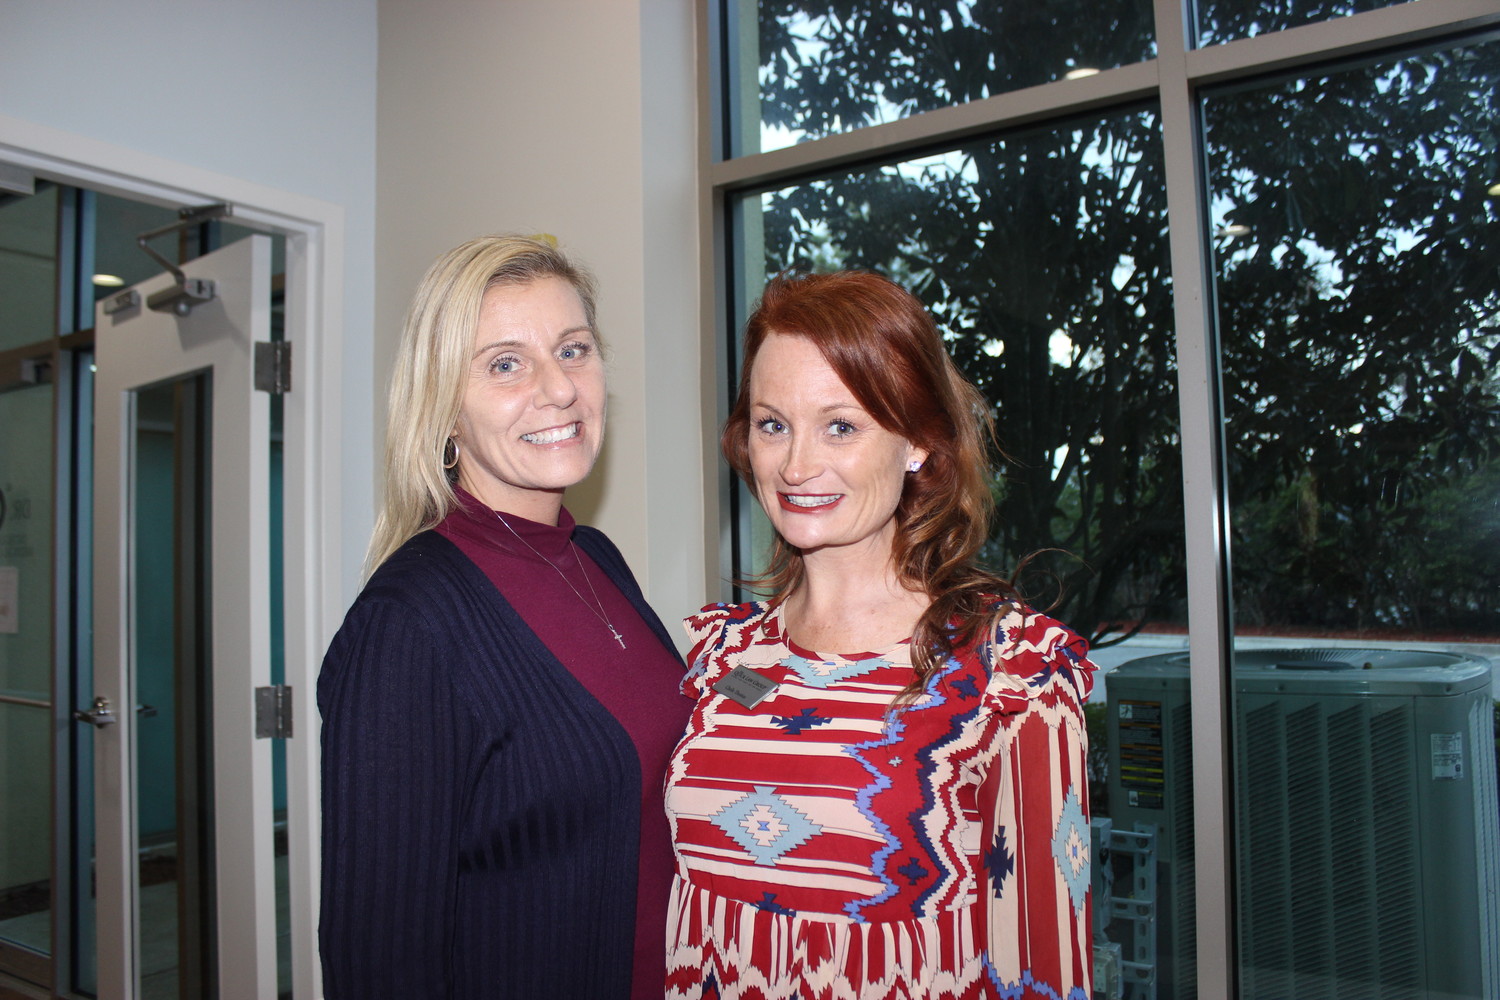 Andrea Marcus and Chelle Thomas attend the Chamber event at New Life Healthcare.